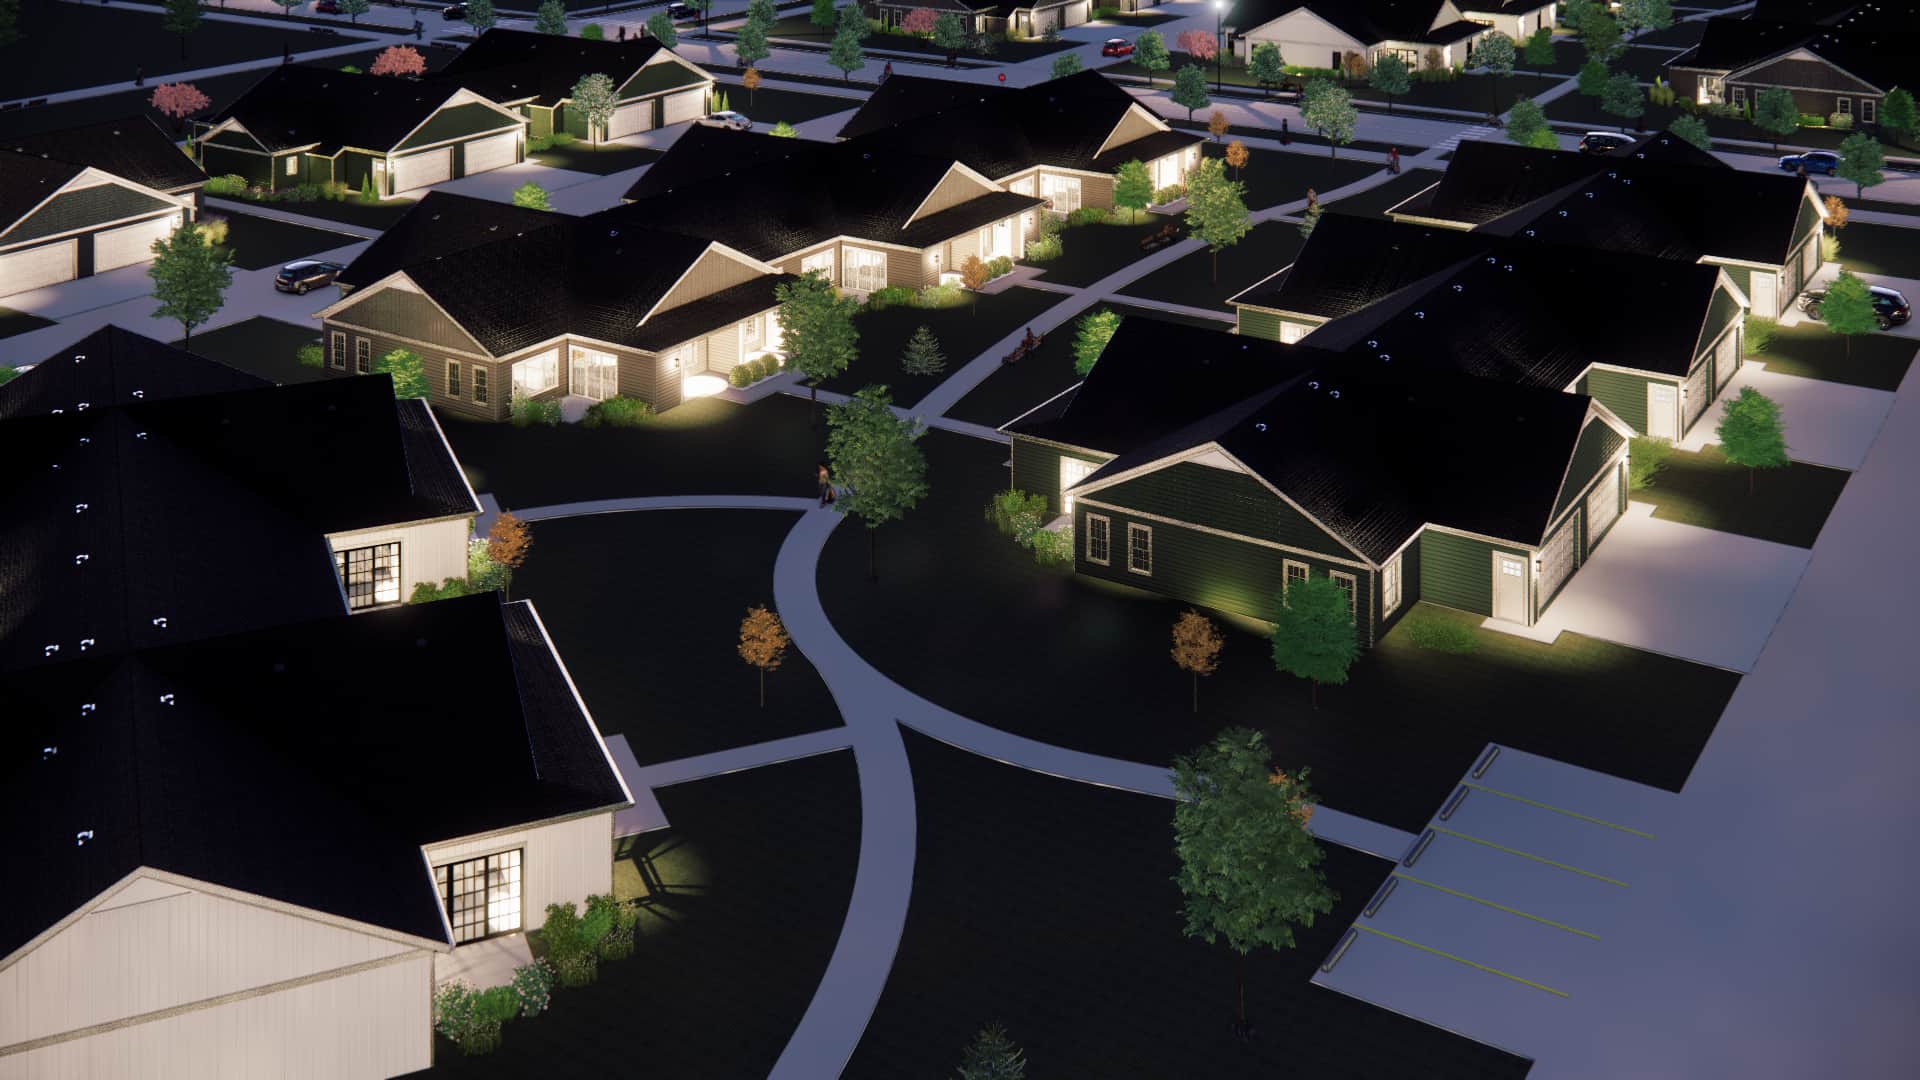 Rendering of the community at night